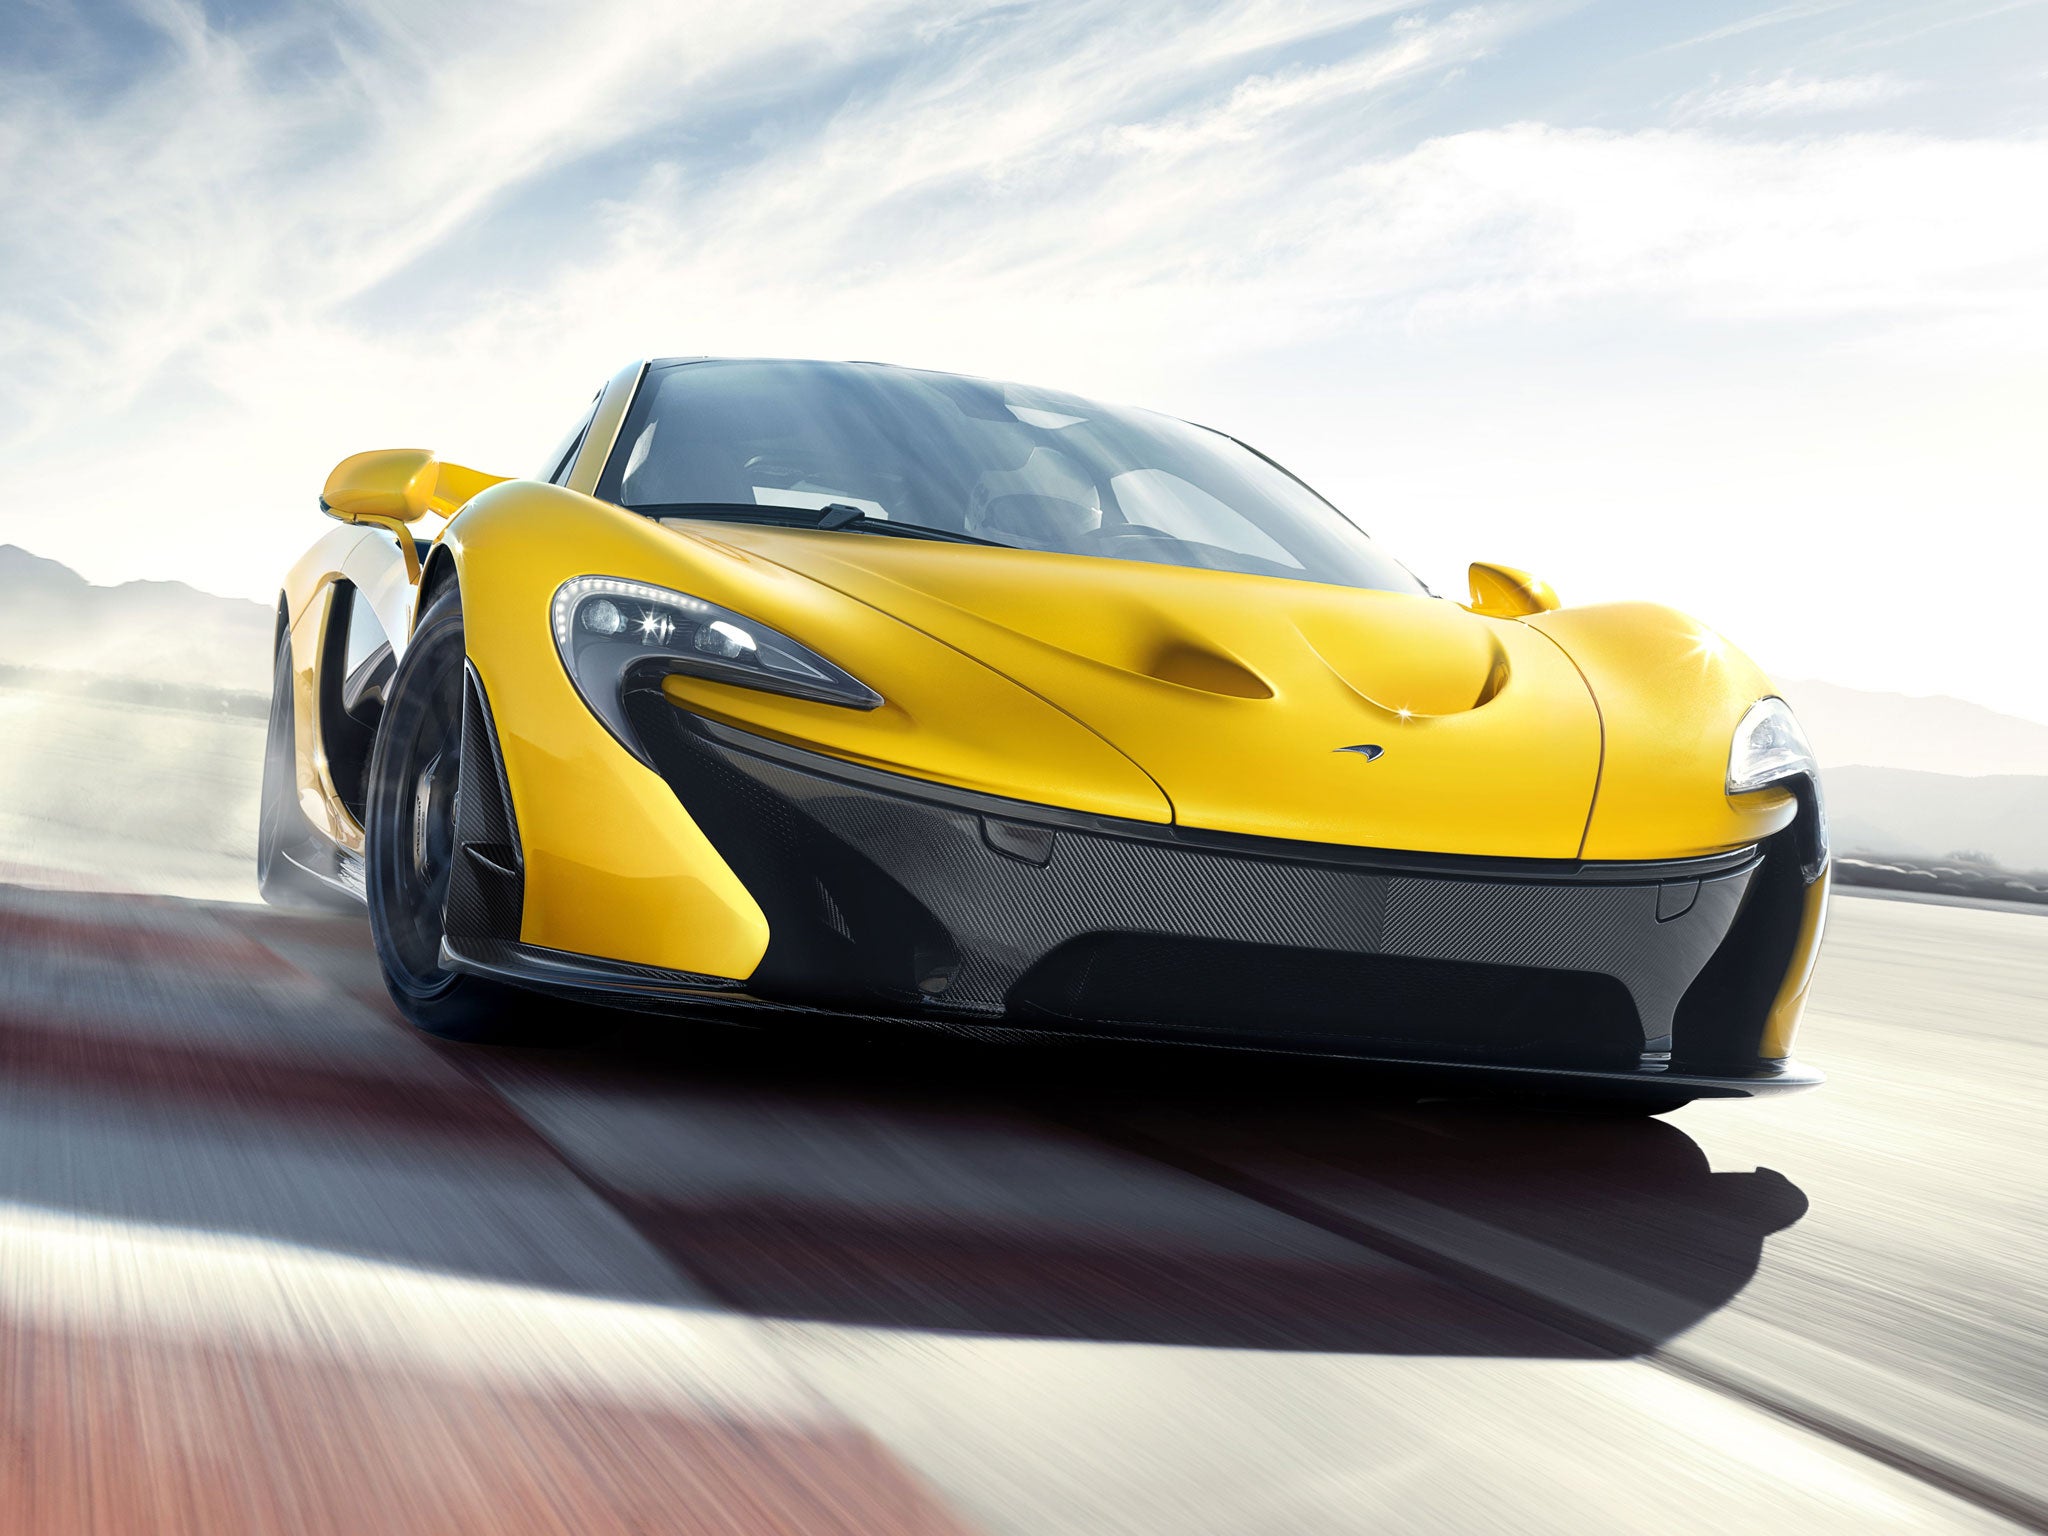 McLaren has confirm the details today of its long-awaited P1 hyper car